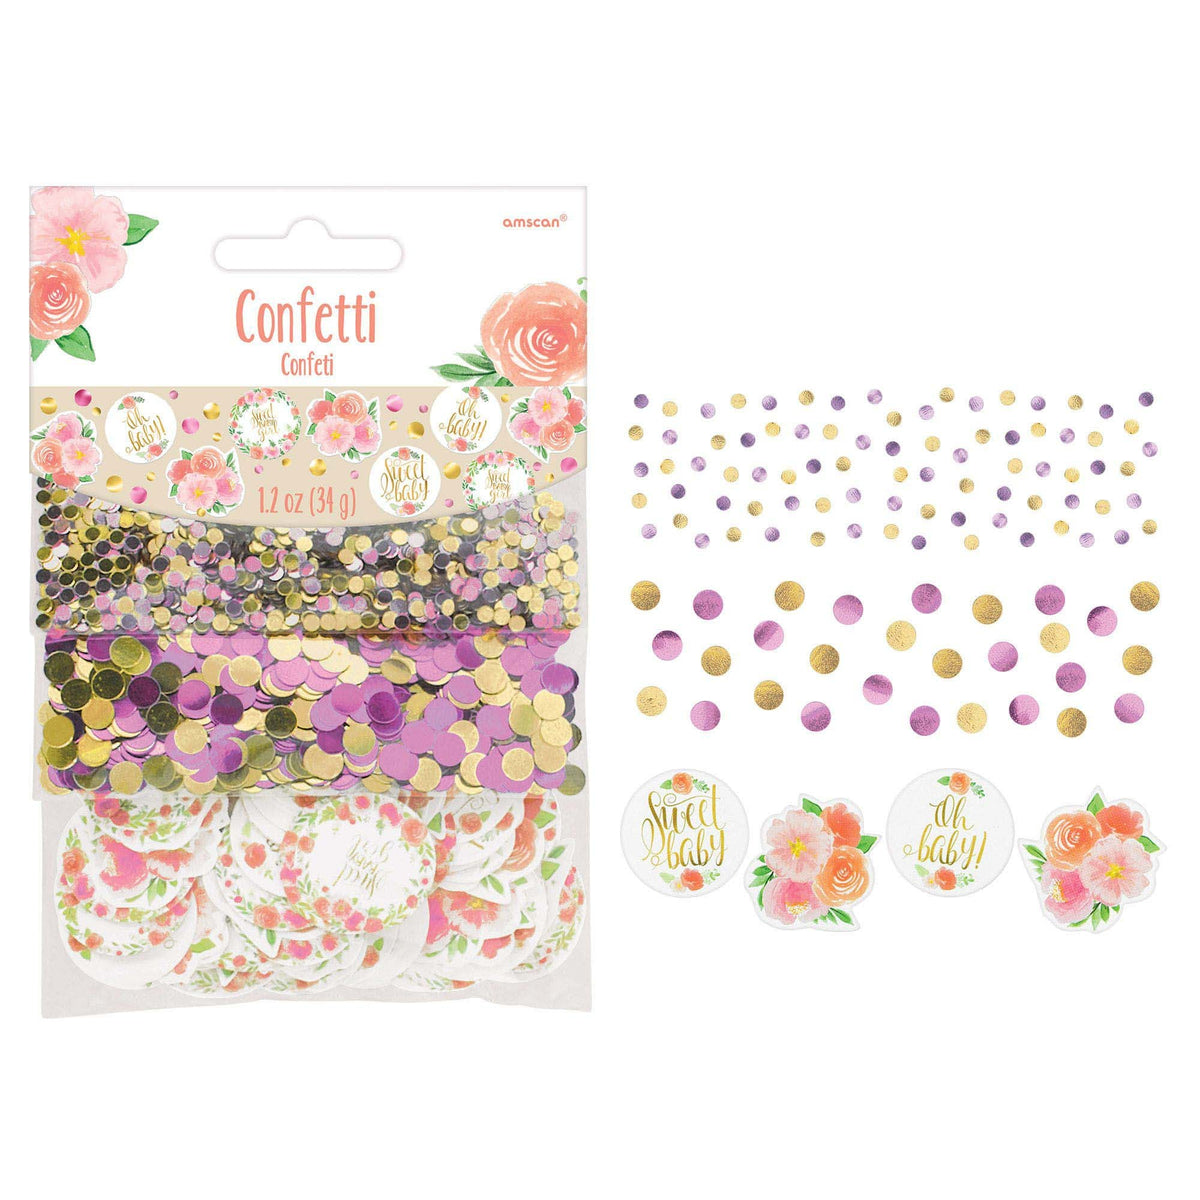 AMSCAN CA Baby Shower Floral Baby Confetti Bag, 1.2 Oz, 1 Count